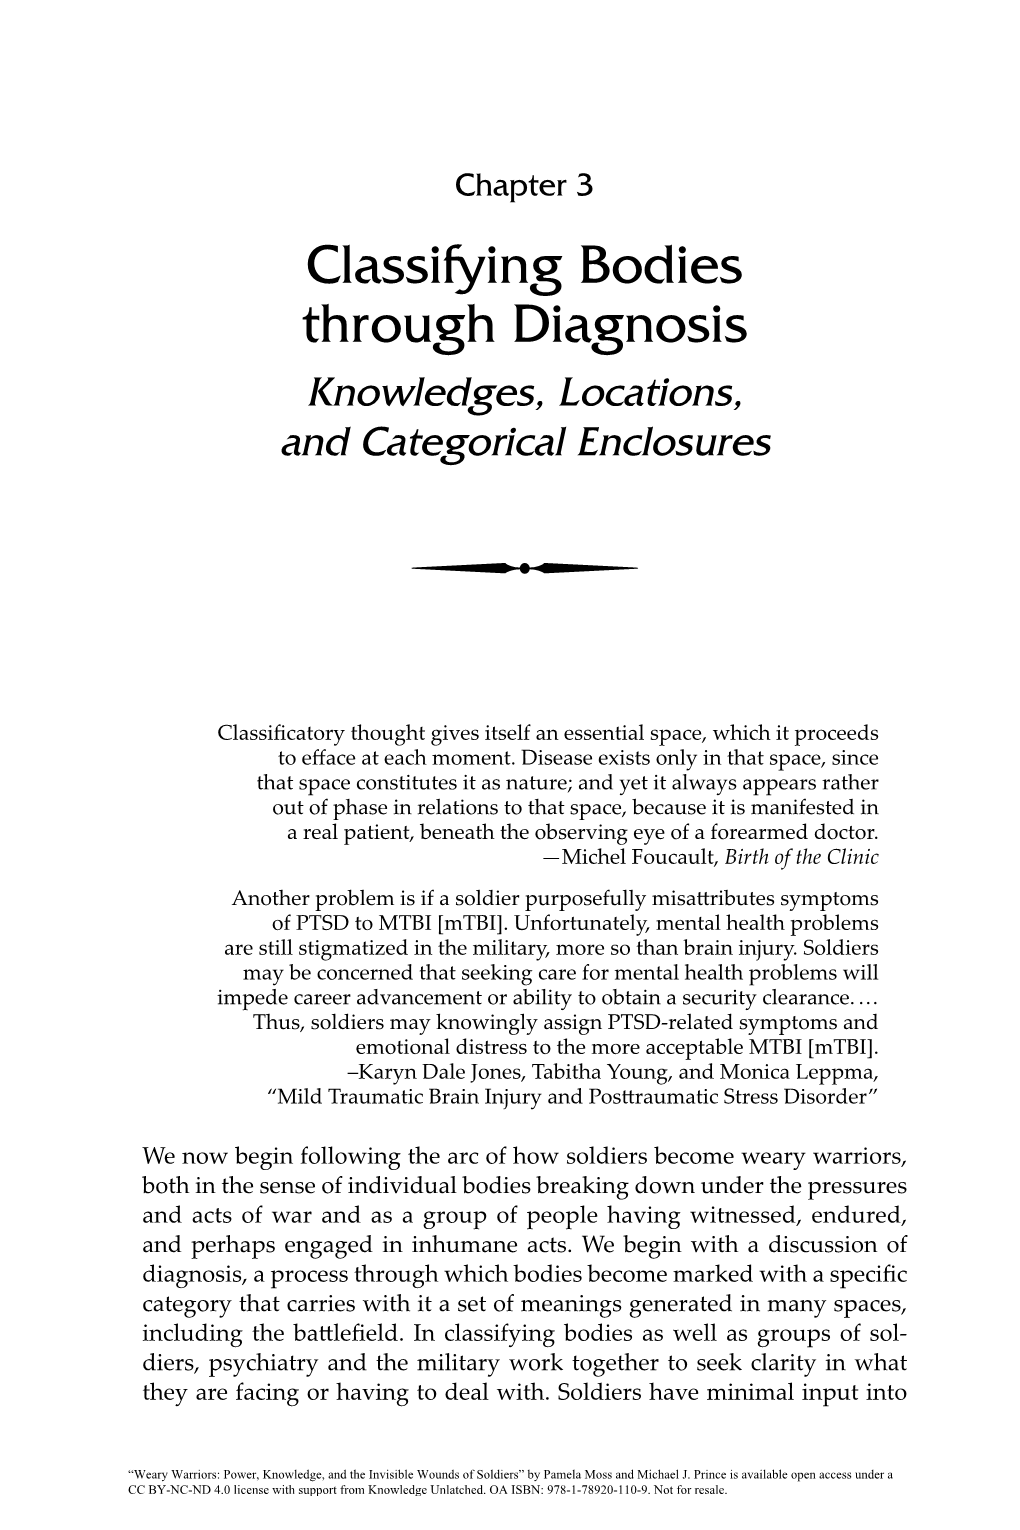 Chapter 3. Classifying Bodies Through Diagnosis